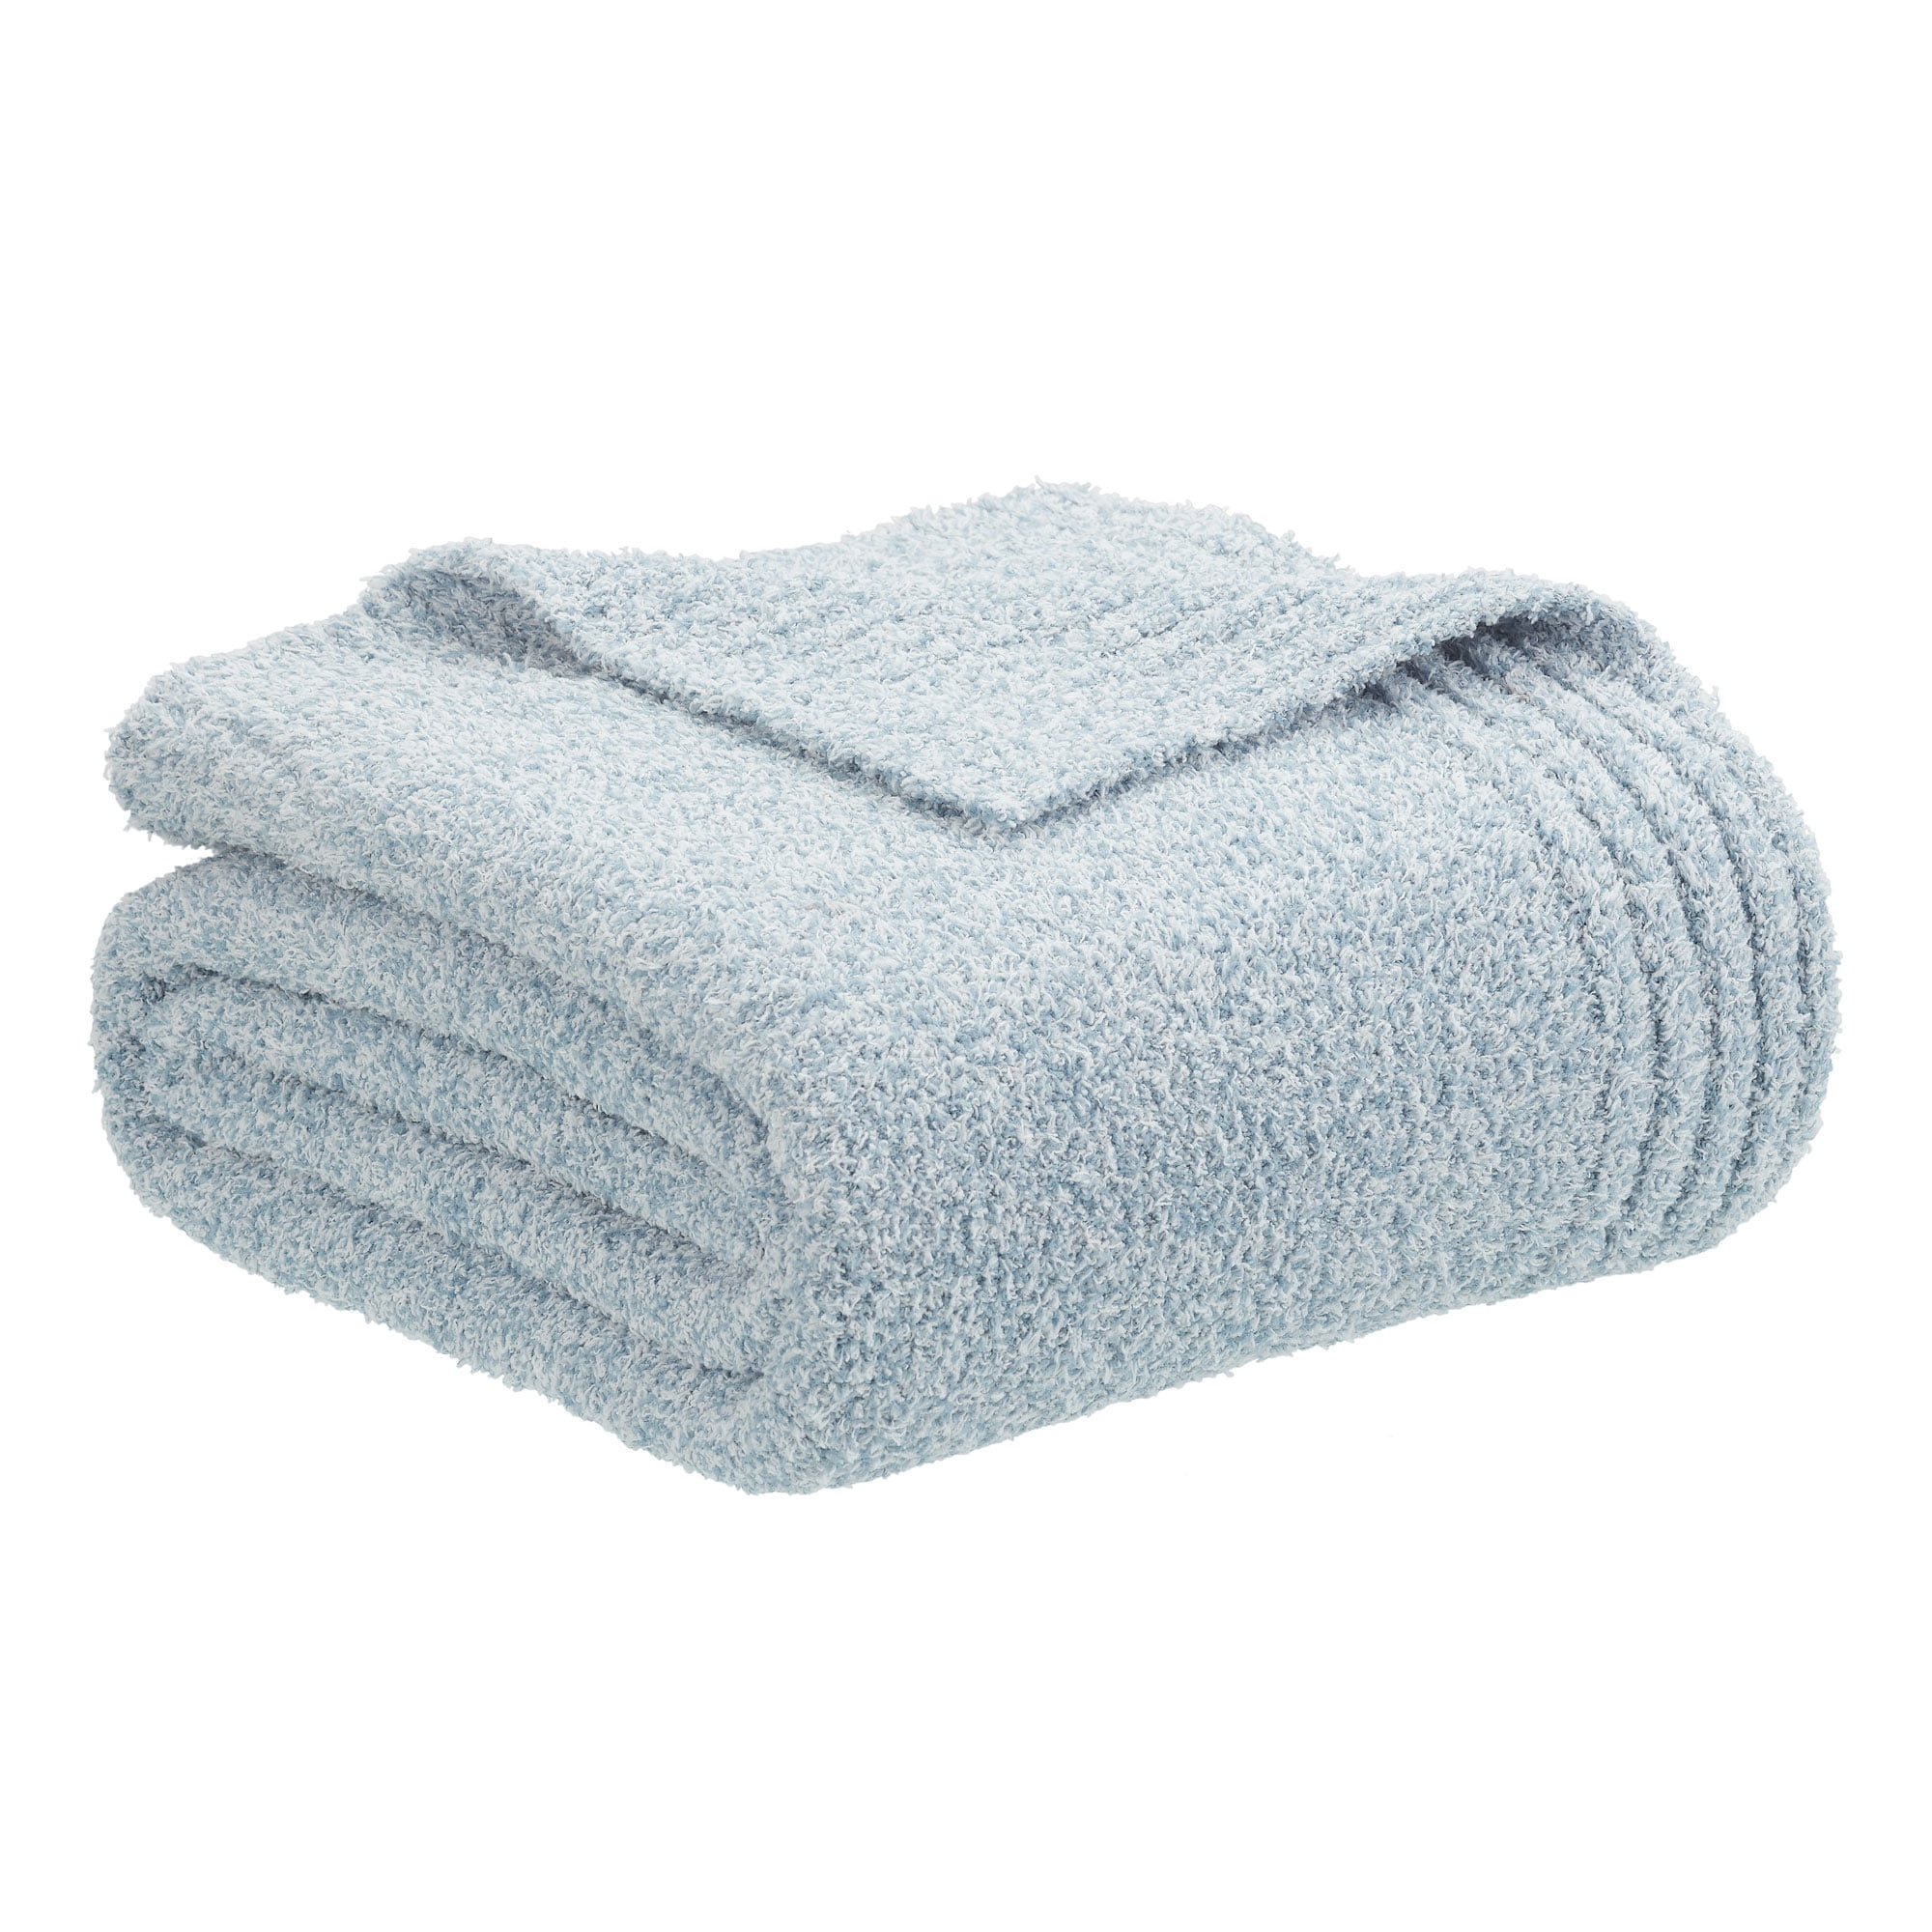 Better Homes & Gardens Cozy Knit Throw, 50"x72", Blue Solid